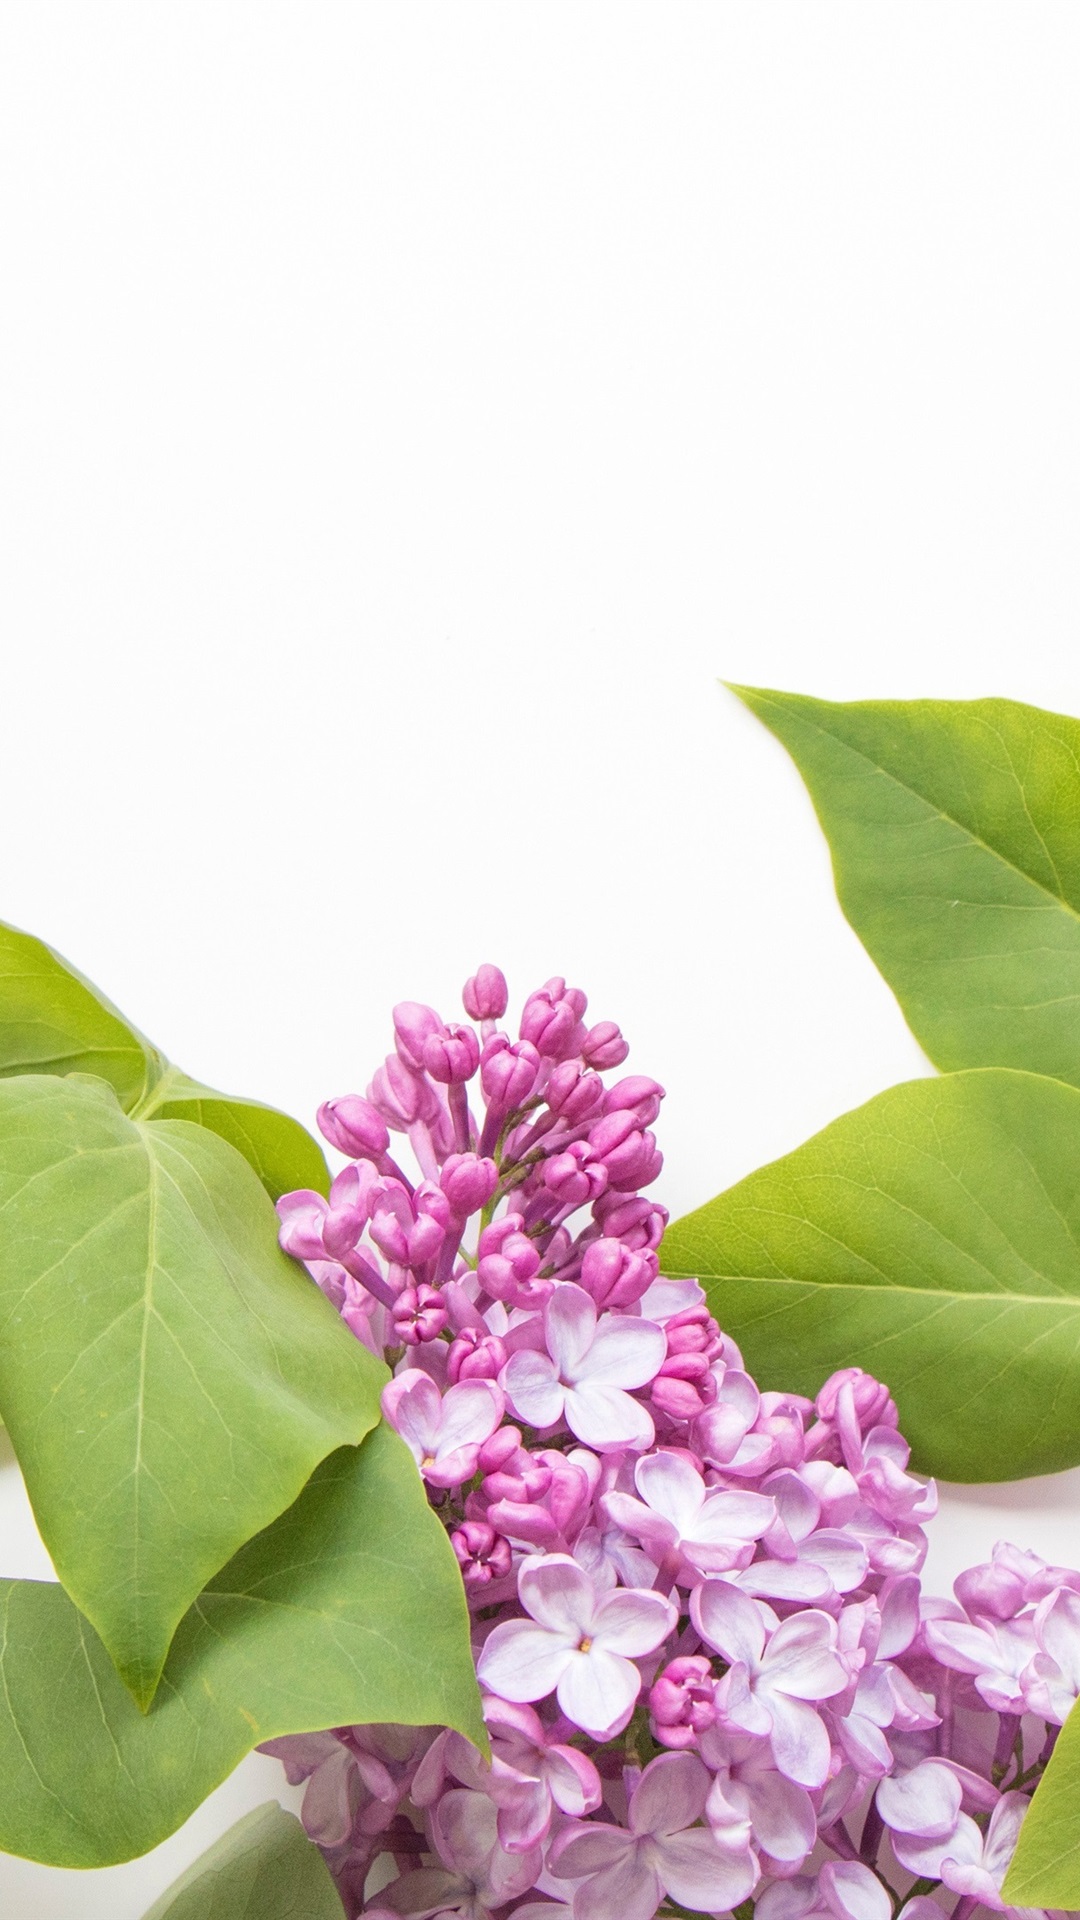 Iphone Wallpaper Pink Lilac Flowers, White Background - White Hd Wallpaper Purple Flower Background Hd - HD Wallpaper 